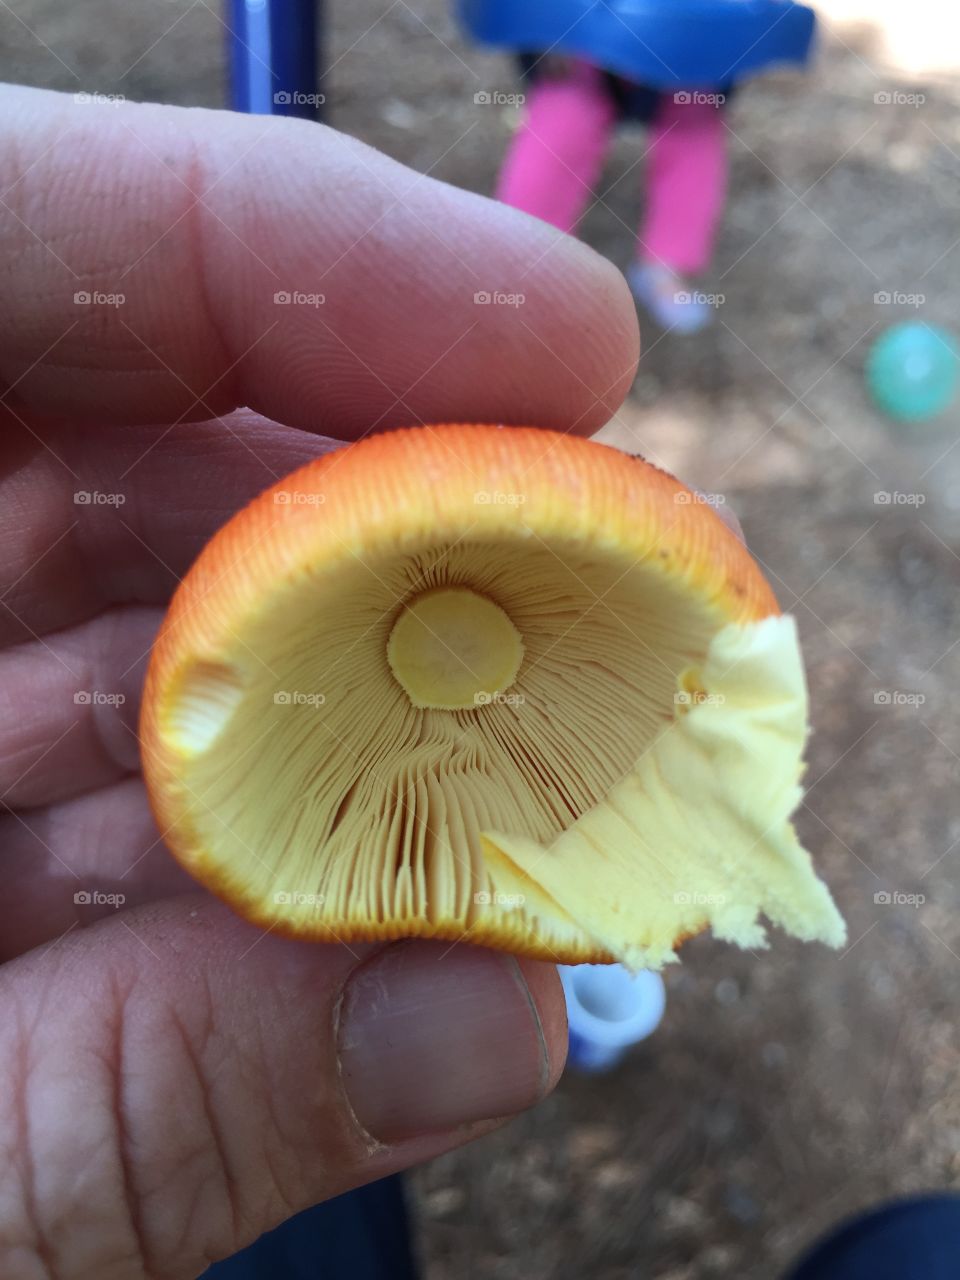 The underside of a 3 inch mushroom with a red cap growing in mulch beneath an oak tree. It has large deep gills that were originally covered with the thin layer hanging from the side.